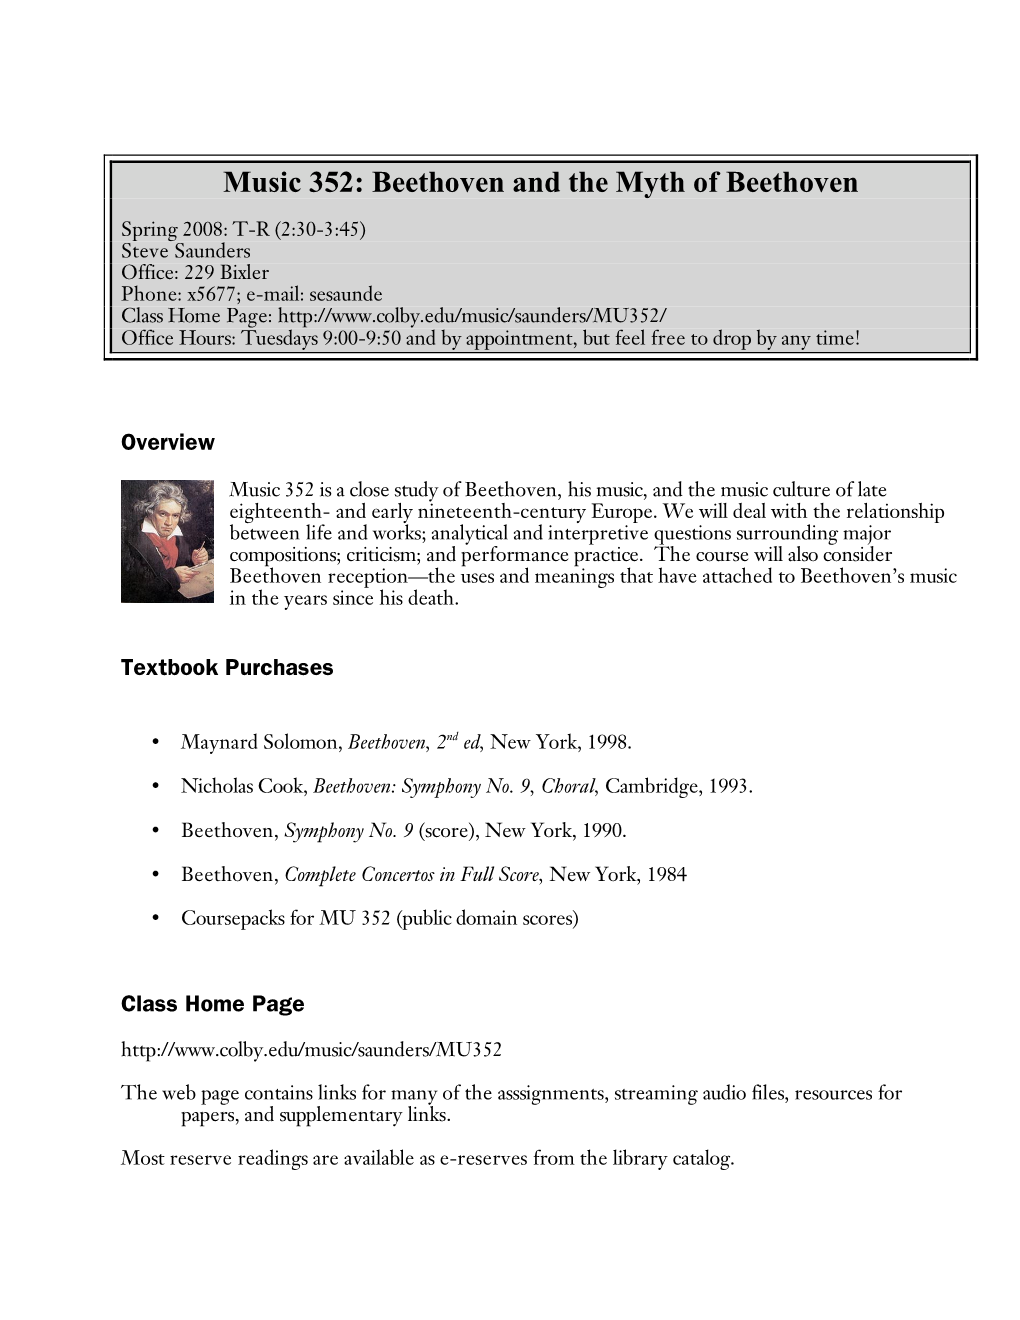 Music 352: Beethoven and the Myth of Beethoven